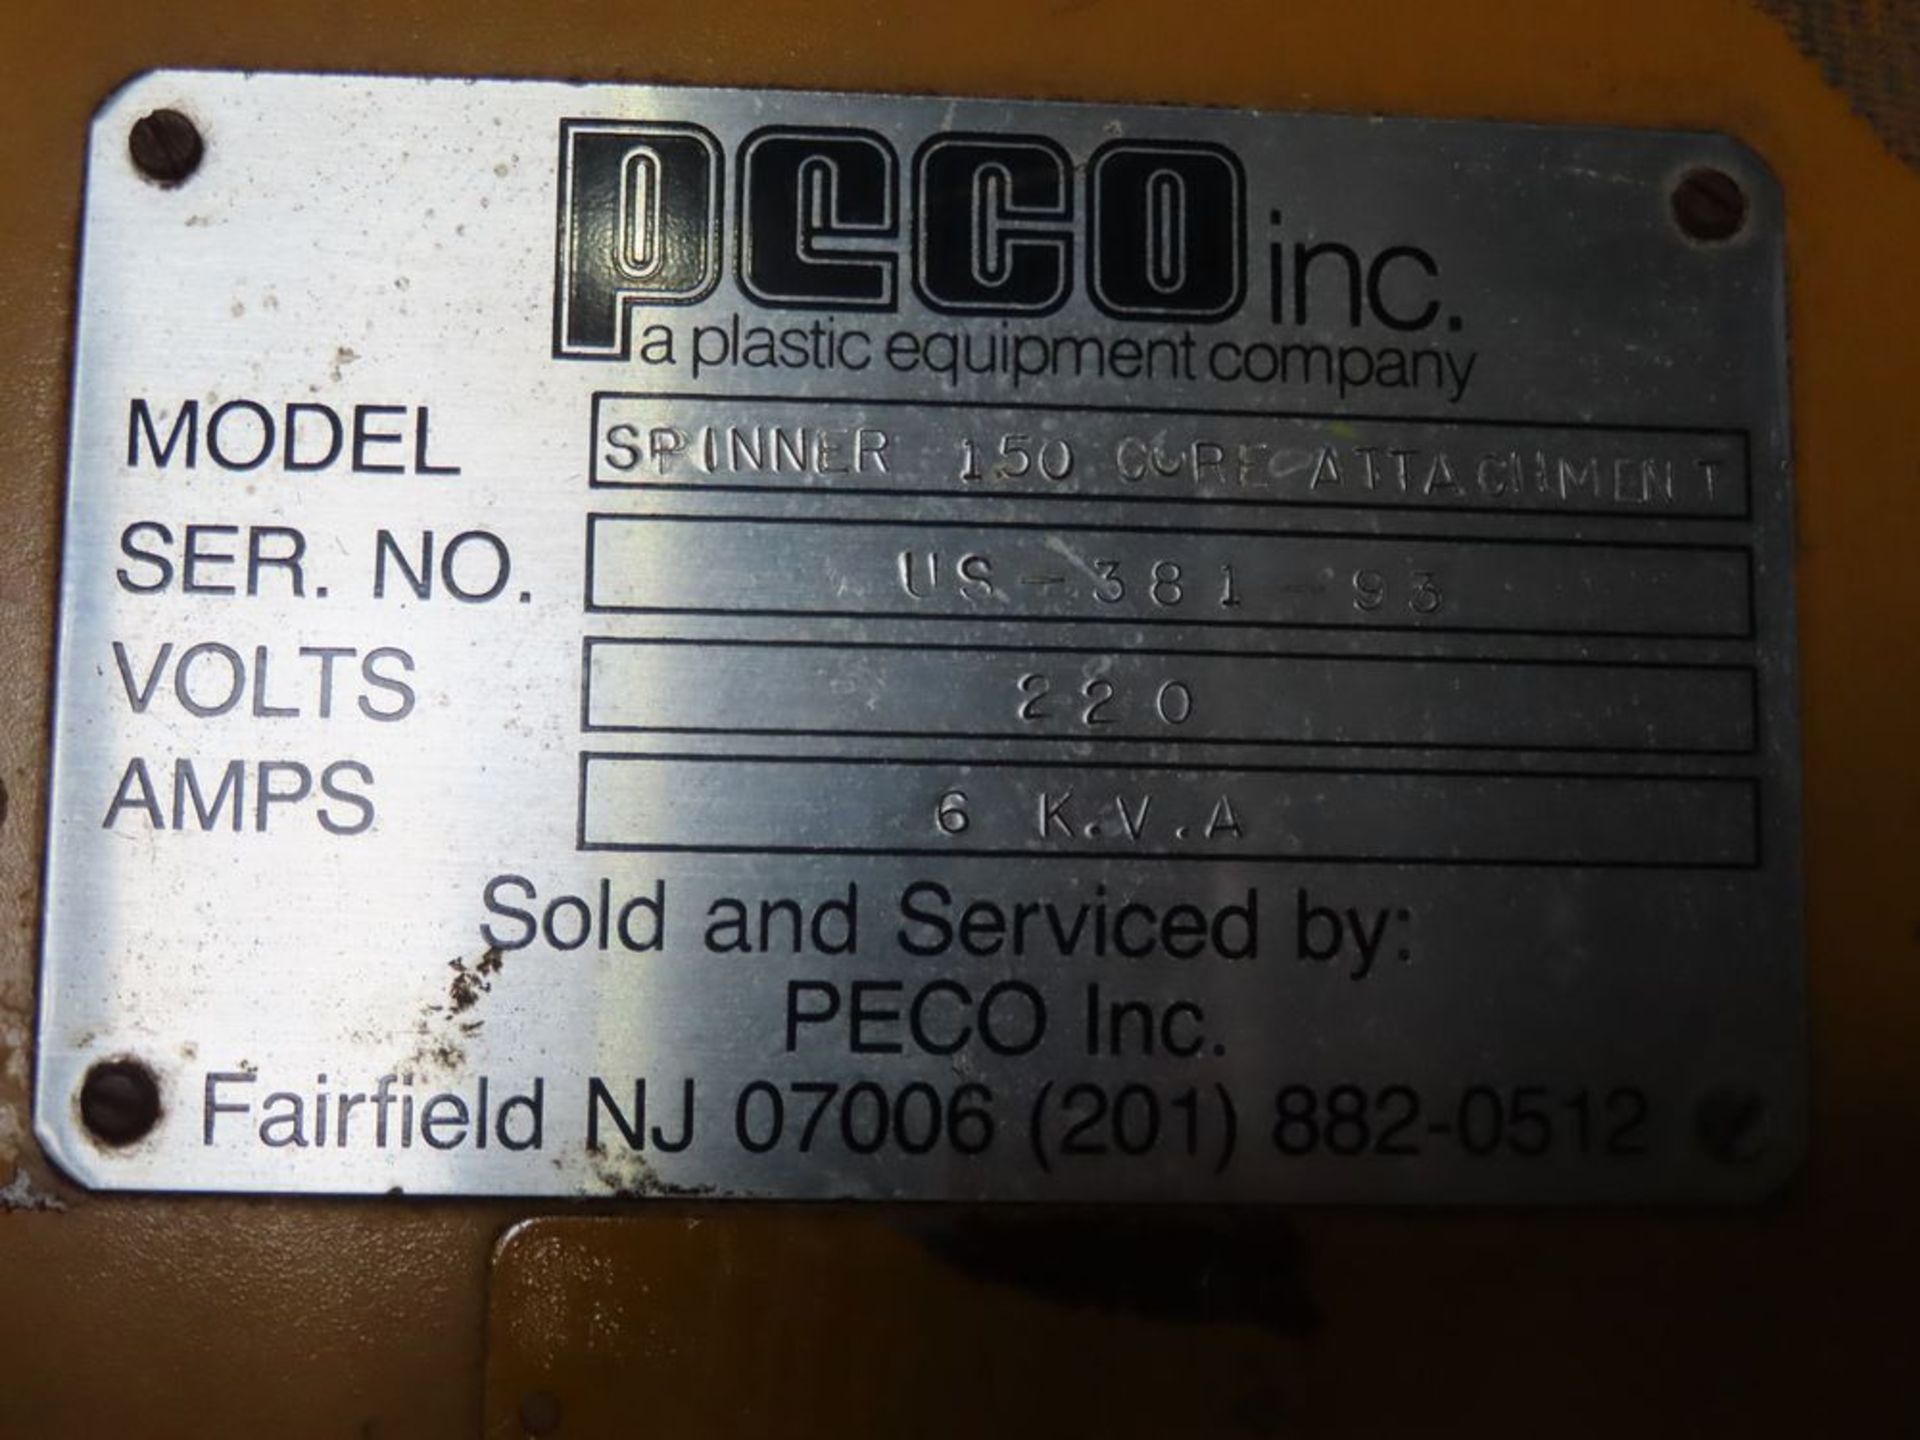 Peco Fas mod. Spinner 150, Core Attachment - Image 3 of 3